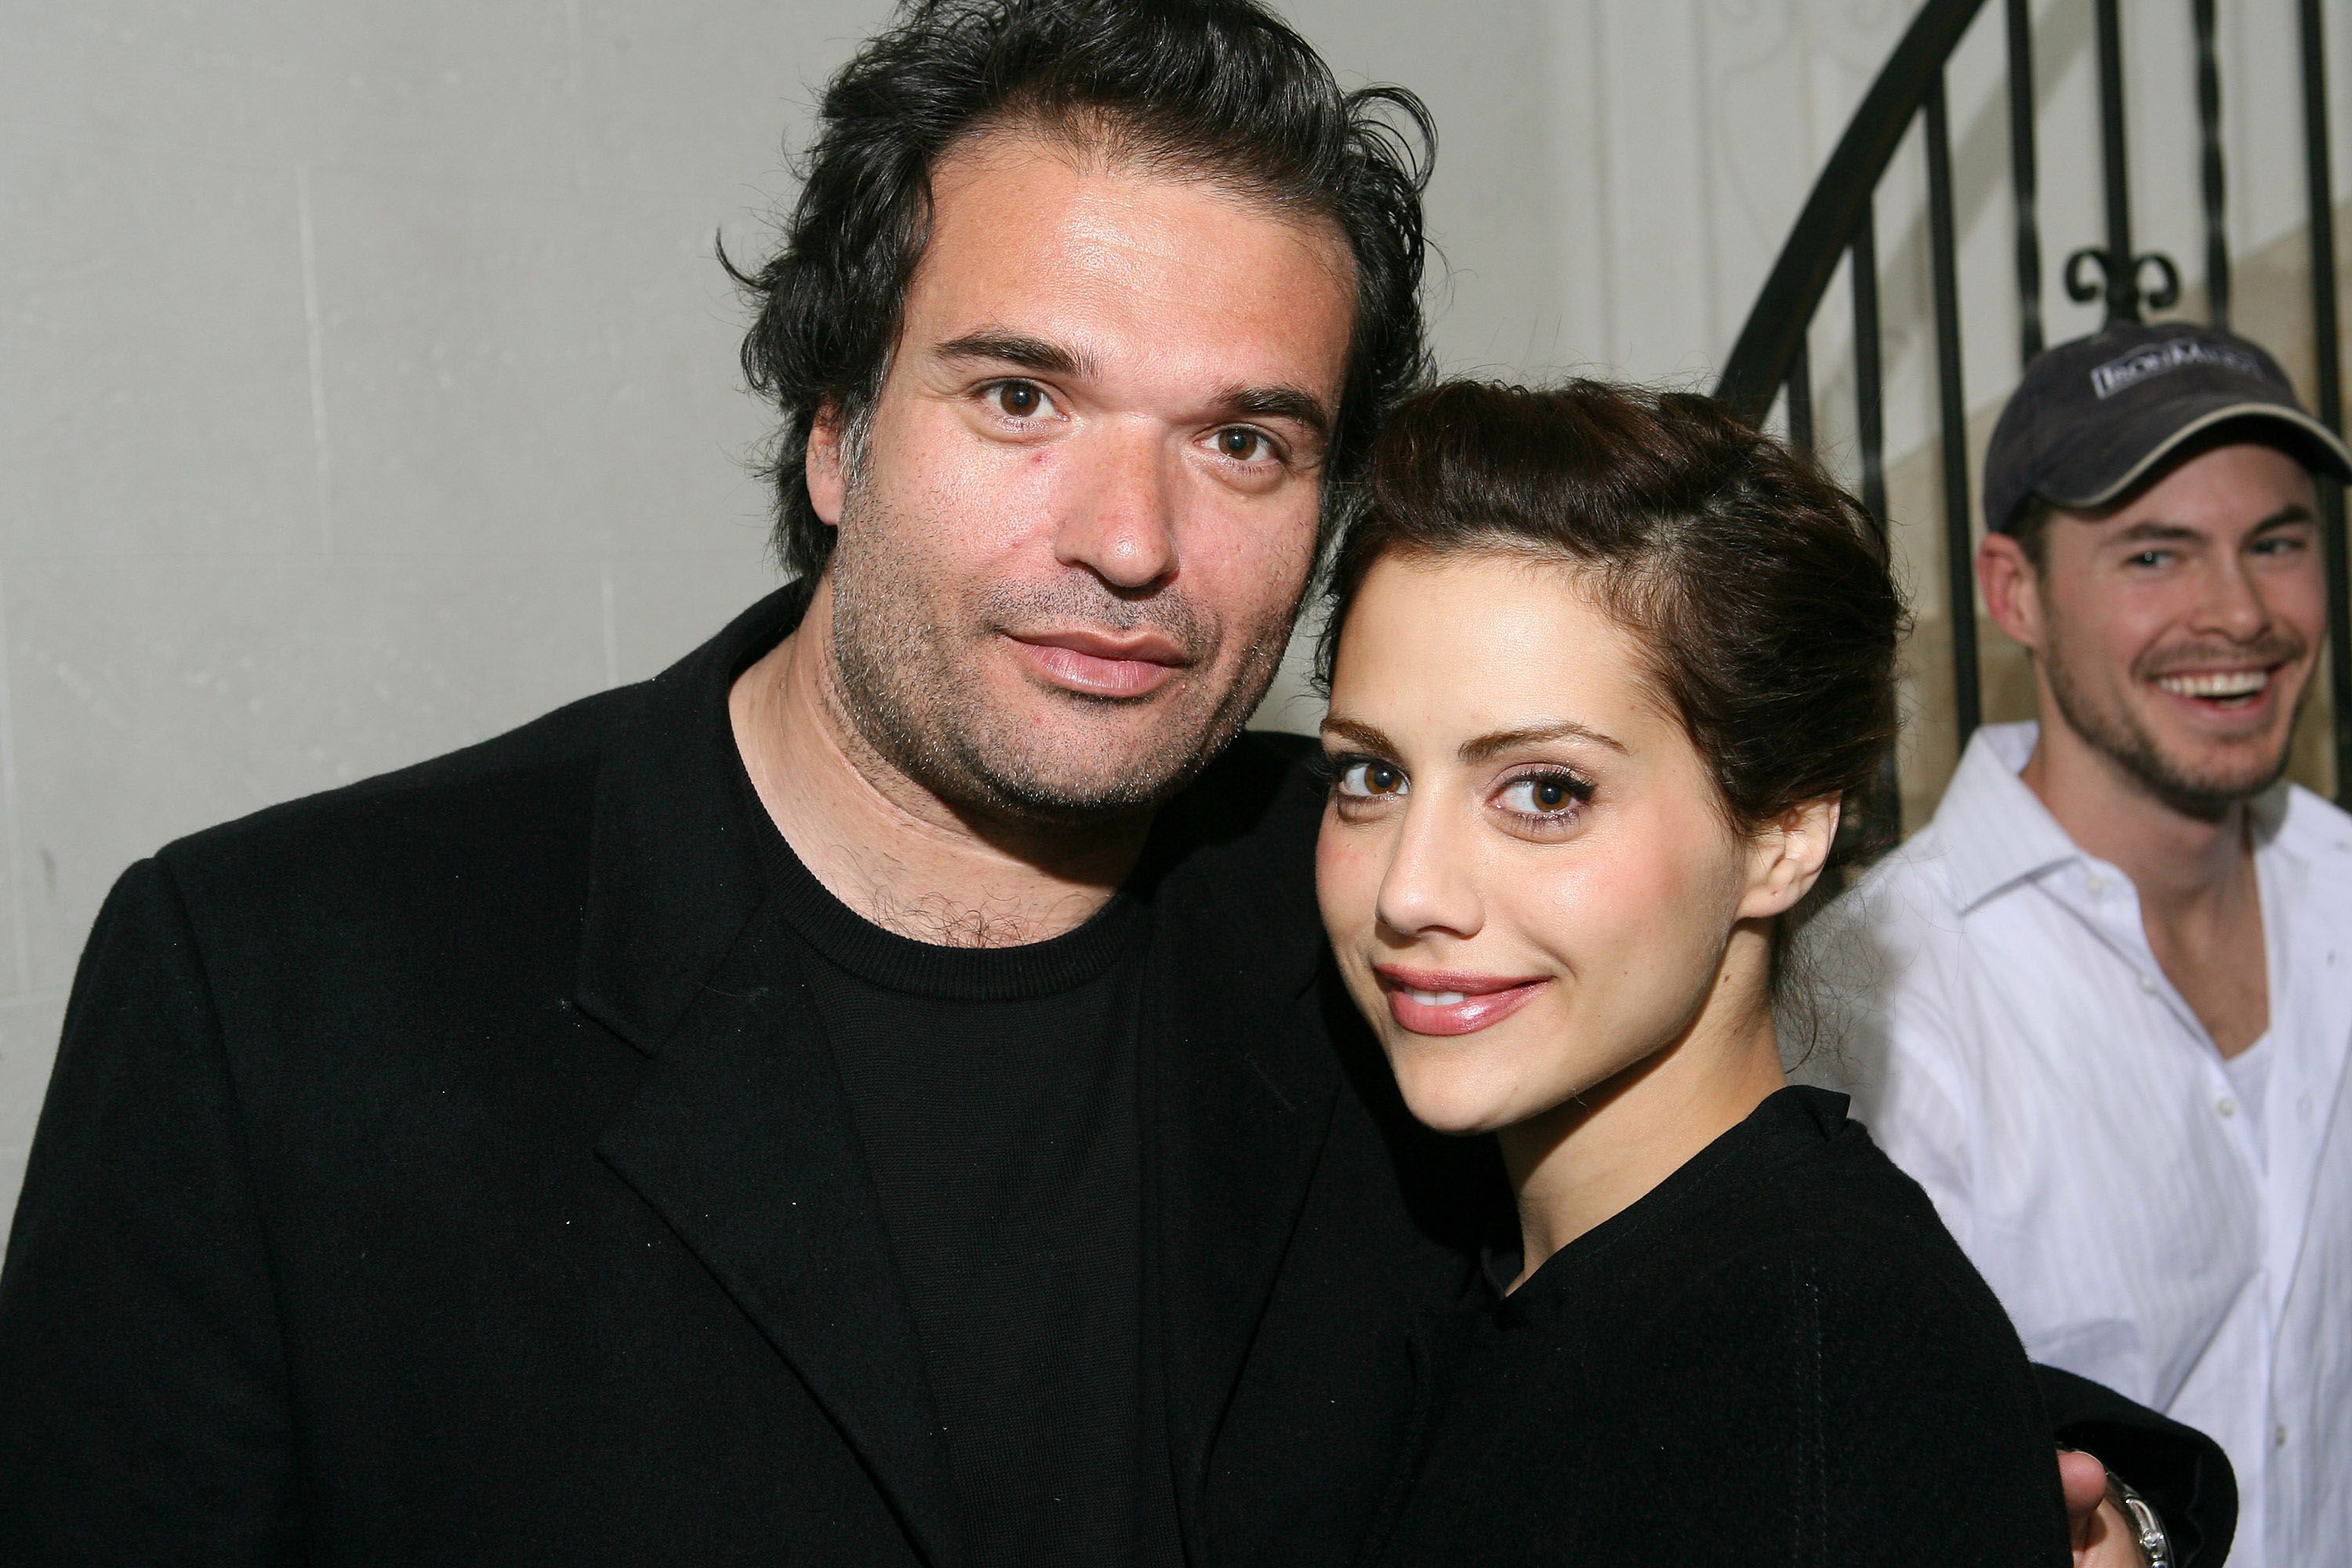 Actress Brittany Murphy posing with husband Simon Monjack | Photo: Michael Bezjian/WireImage via Getty Images